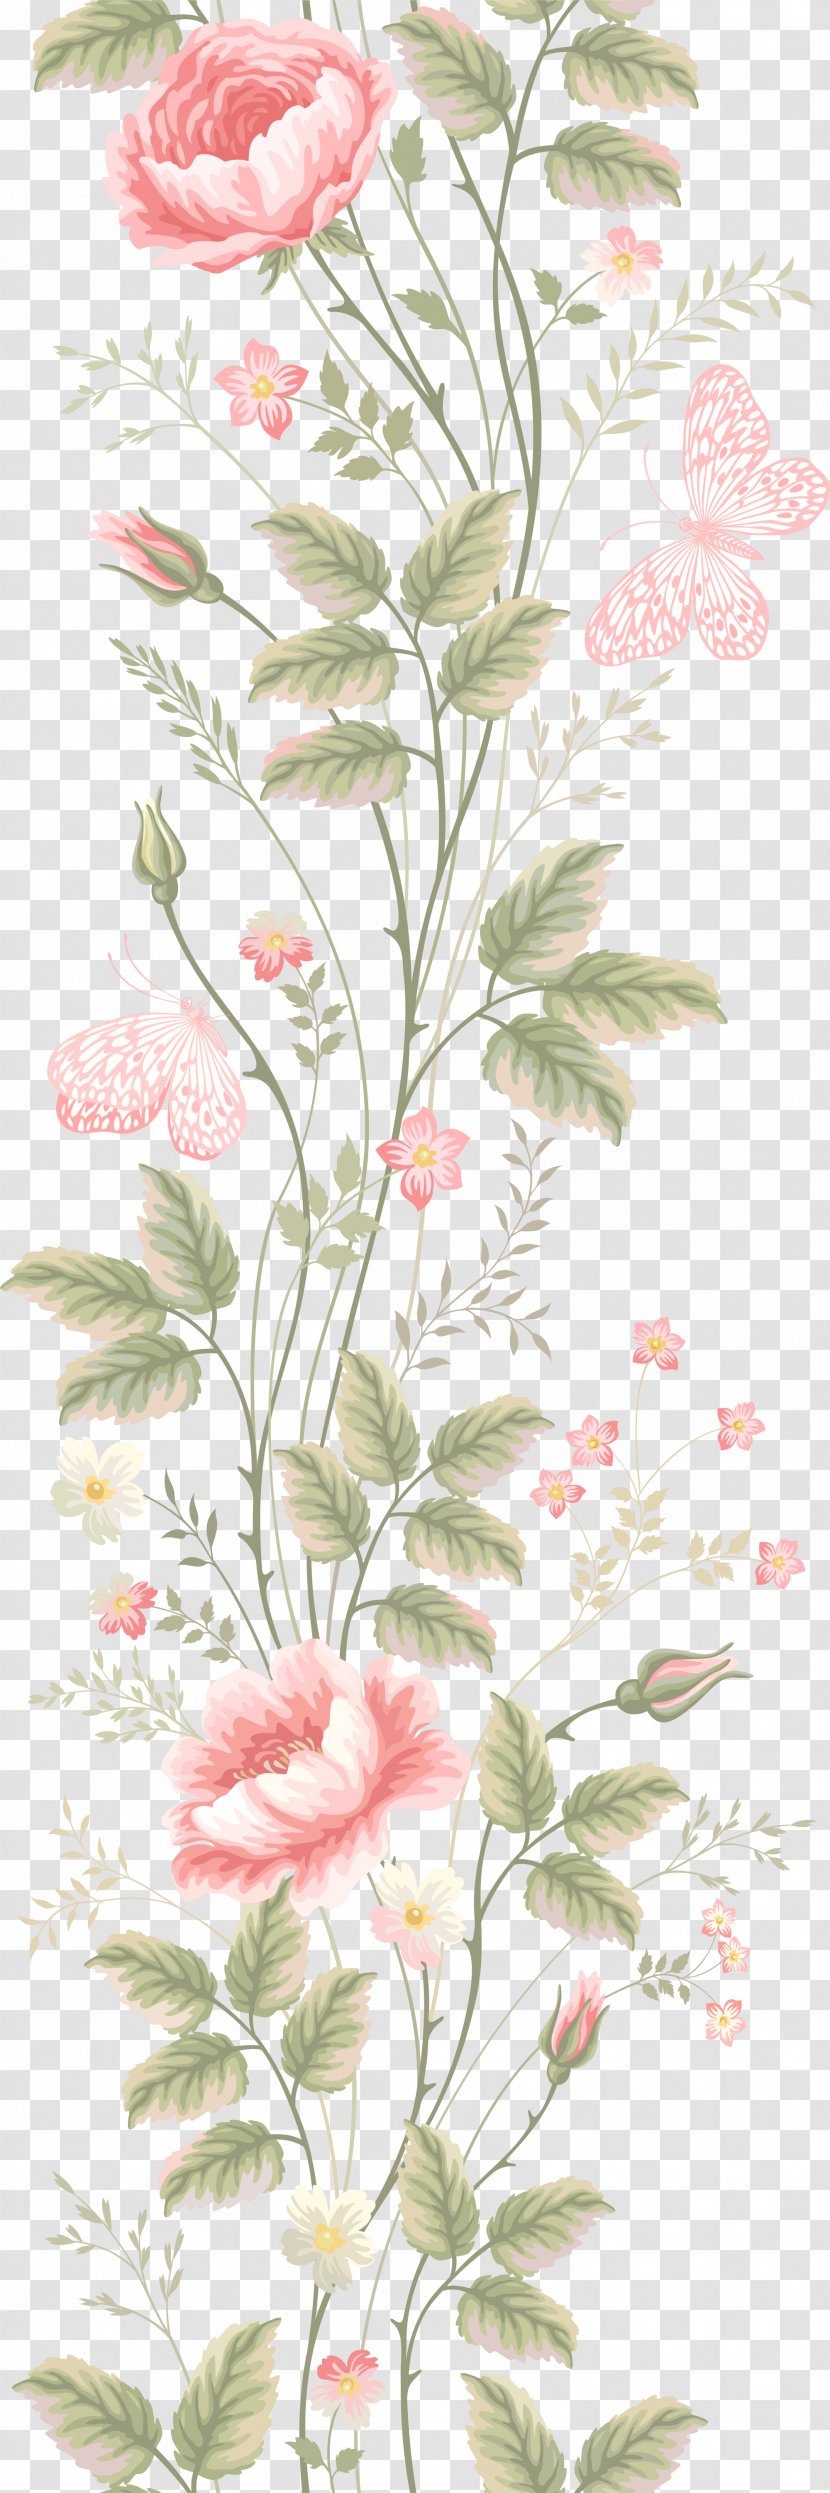 Flower - Rose Family - Painted Pink Flowers Transparent PNG